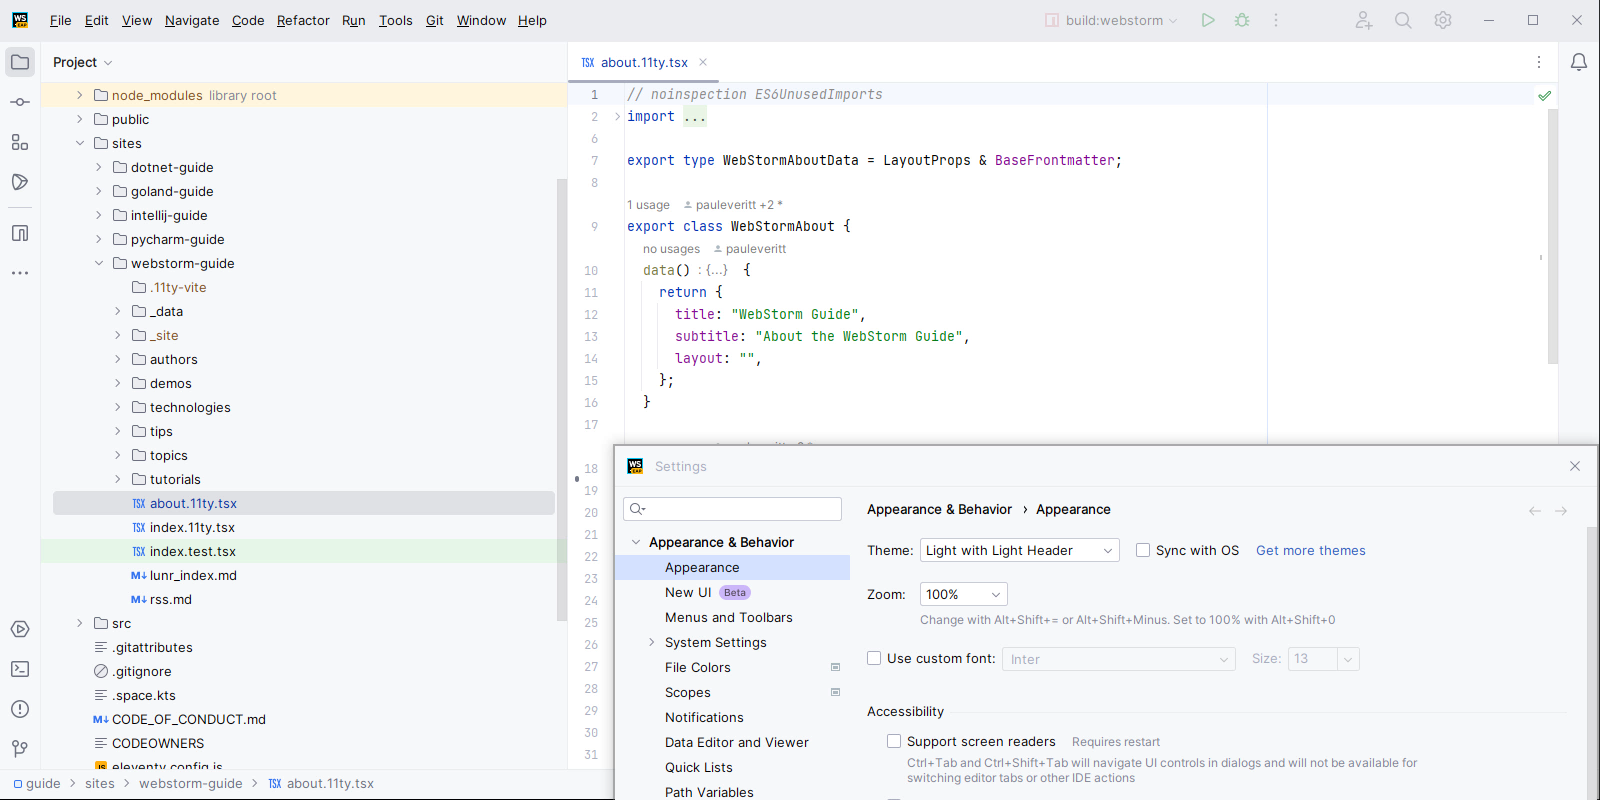 The new UI light theme with light header presented in the WebStorm